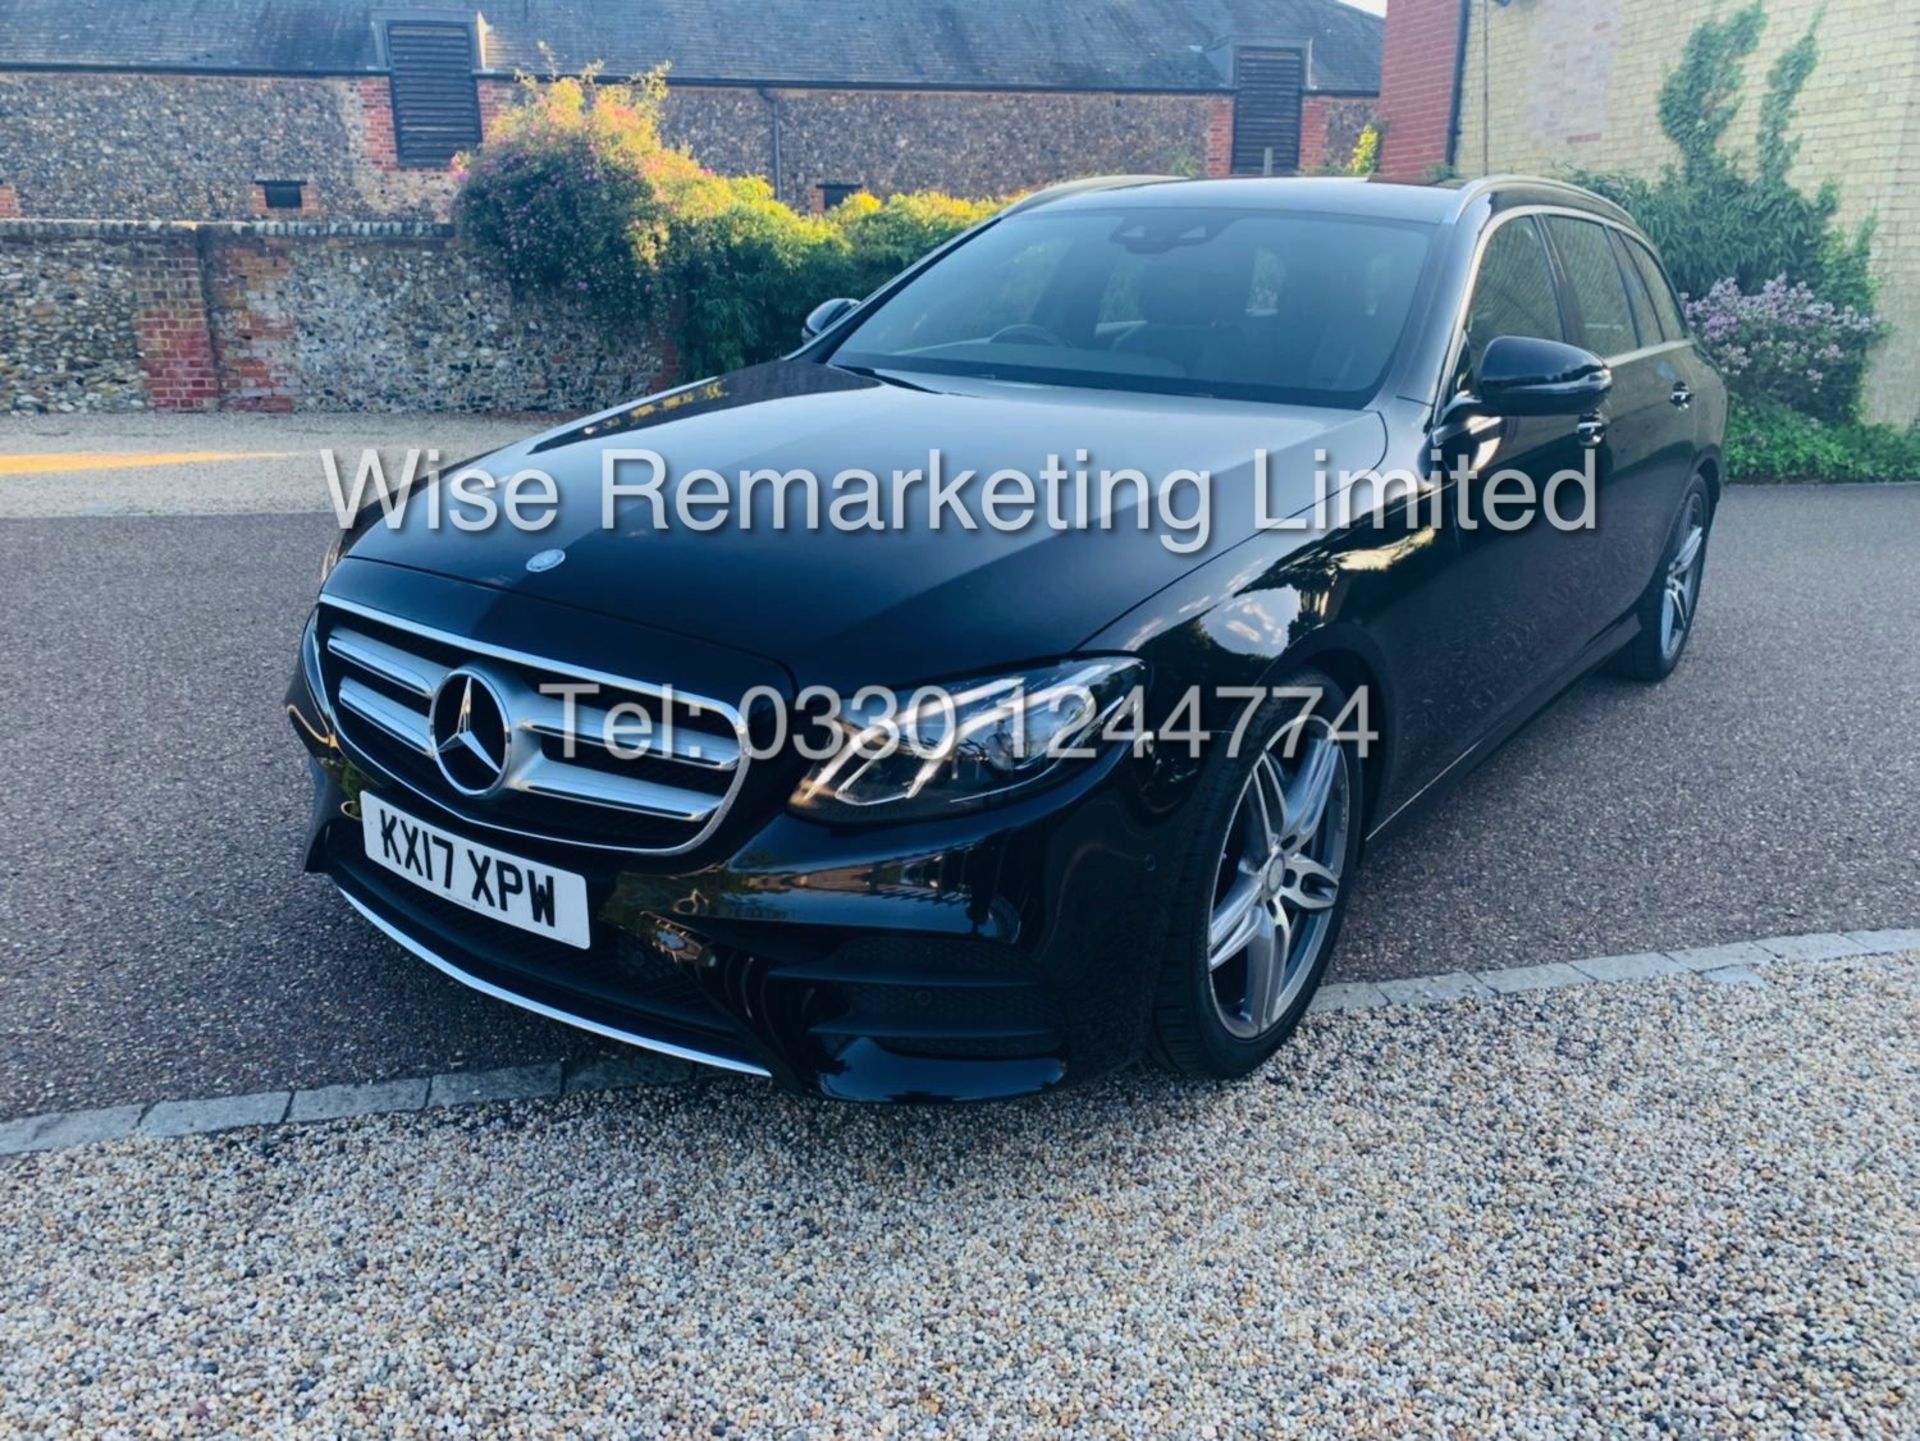 MERCEDES E CLASS ESTATE E220D AMG LINE 2017 / 9G -TRONIC / *LOW MILES* / 1 OWNER - Image 2 of 42